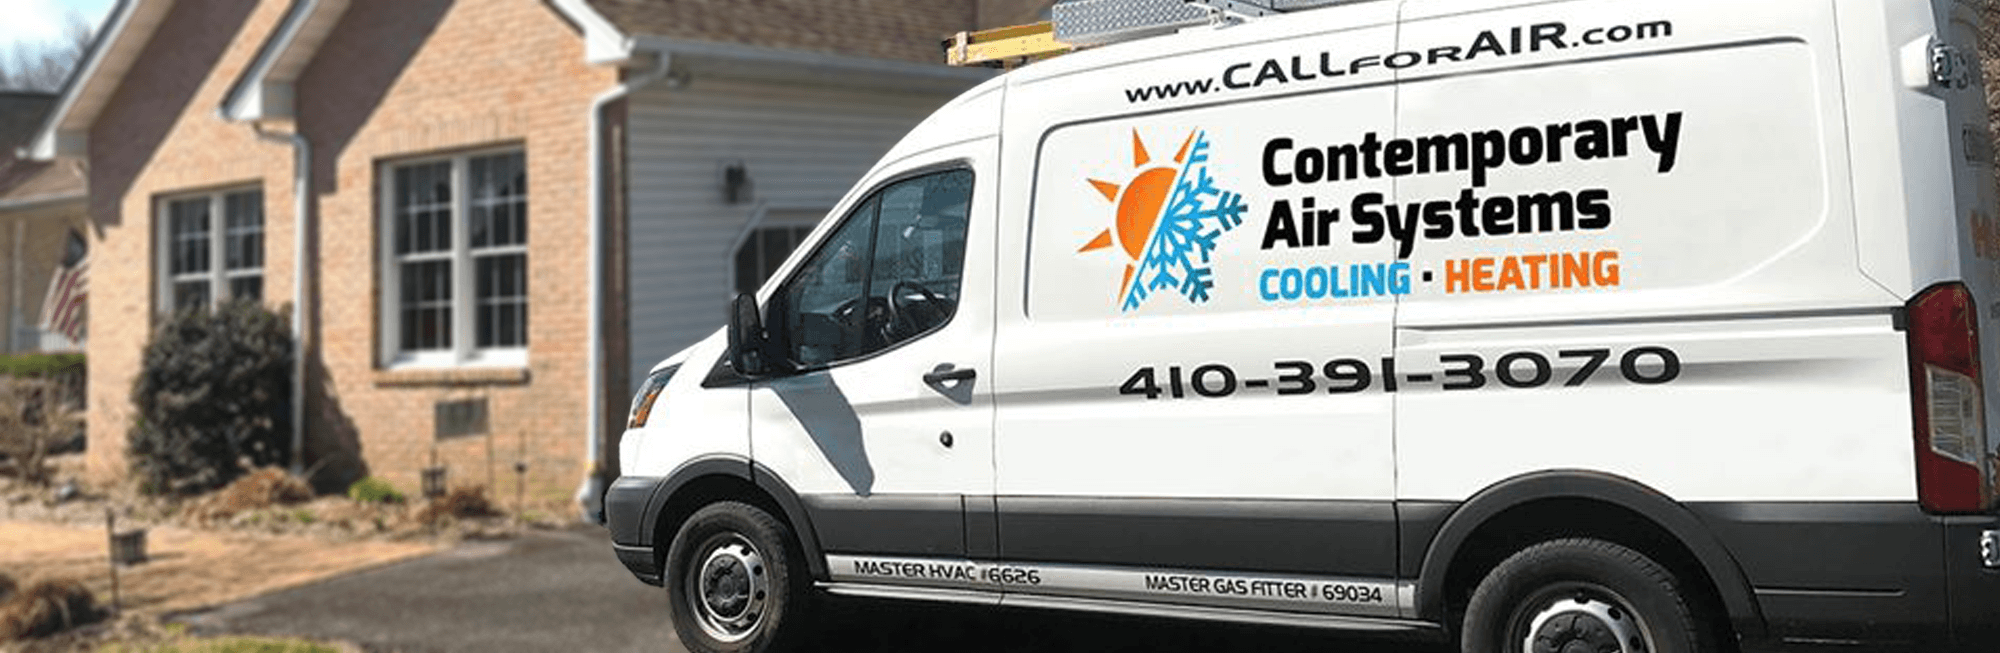 Email us any questions about our Furnace repair in Dundalk MD